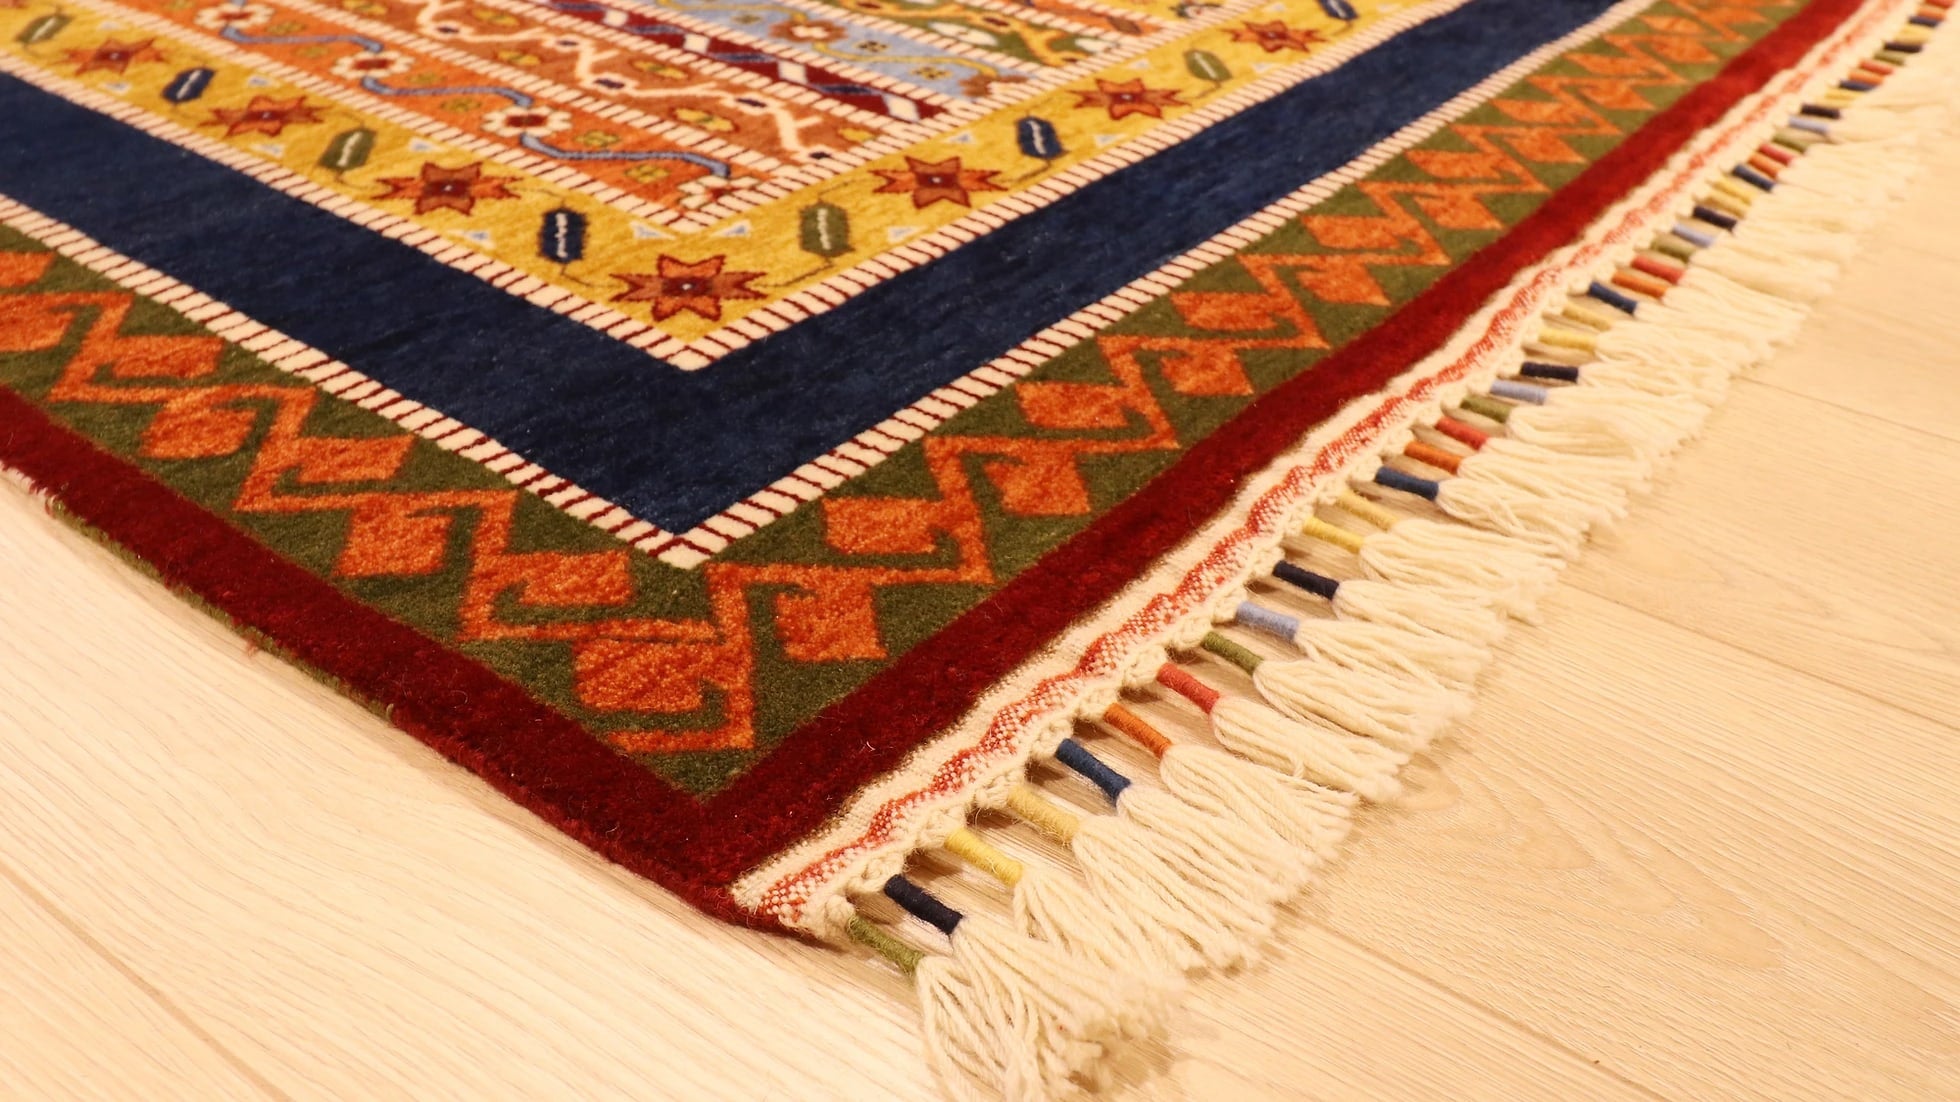 tassels of Turkish oriental ottoman palace style royal carpet in earthy tones with floral patterns